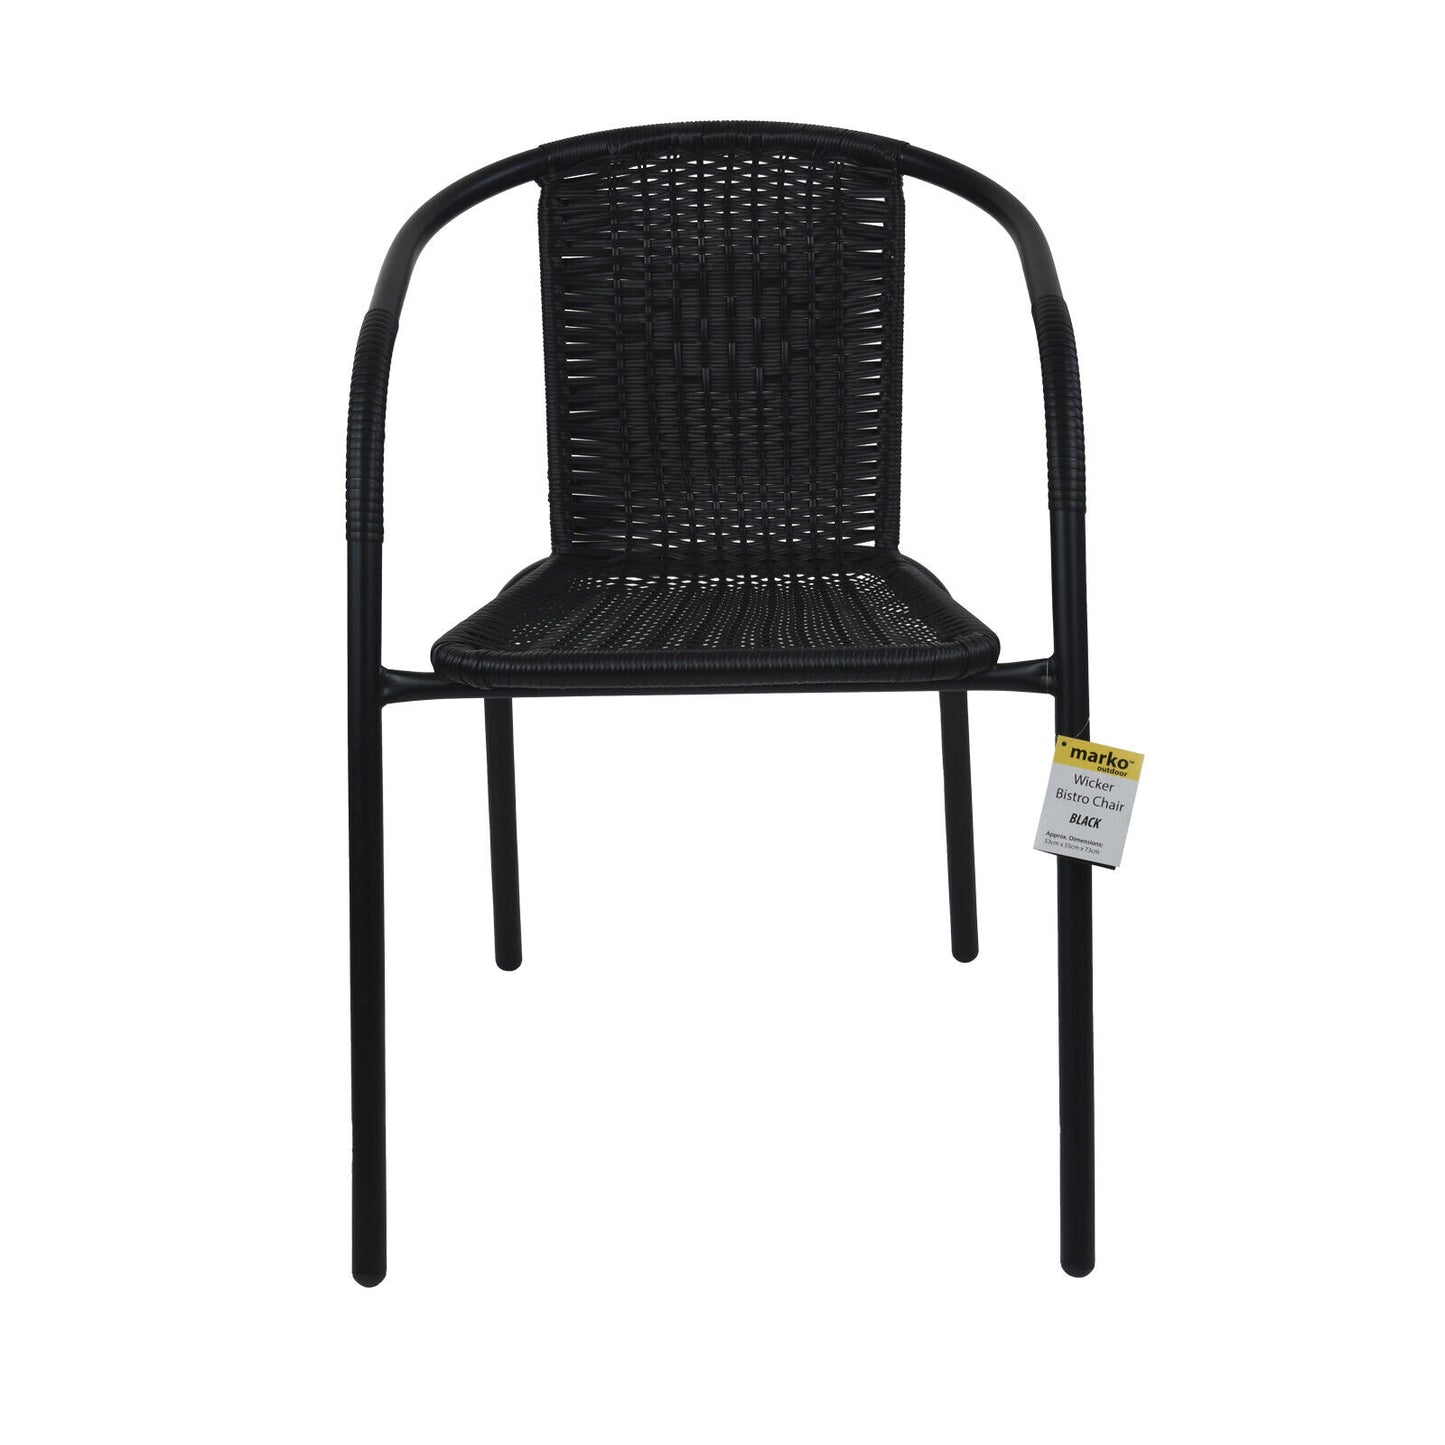 5PC Black Wicker Chairs with 60cm Black Wicker Edge Round Bistro Table